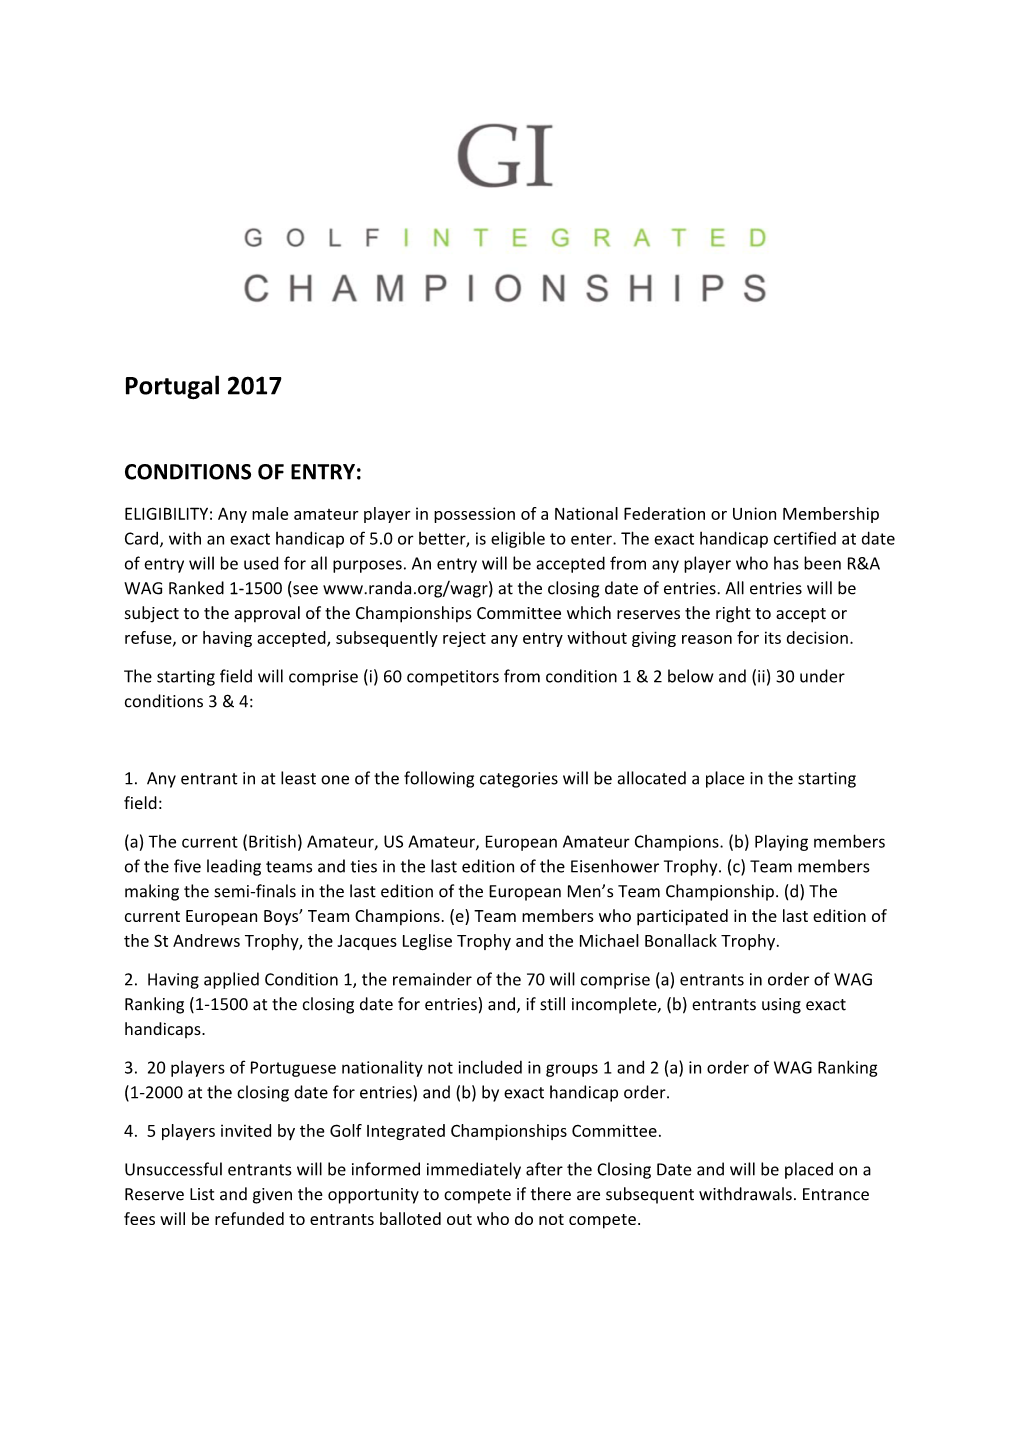 GI Championships Conditions of Entry